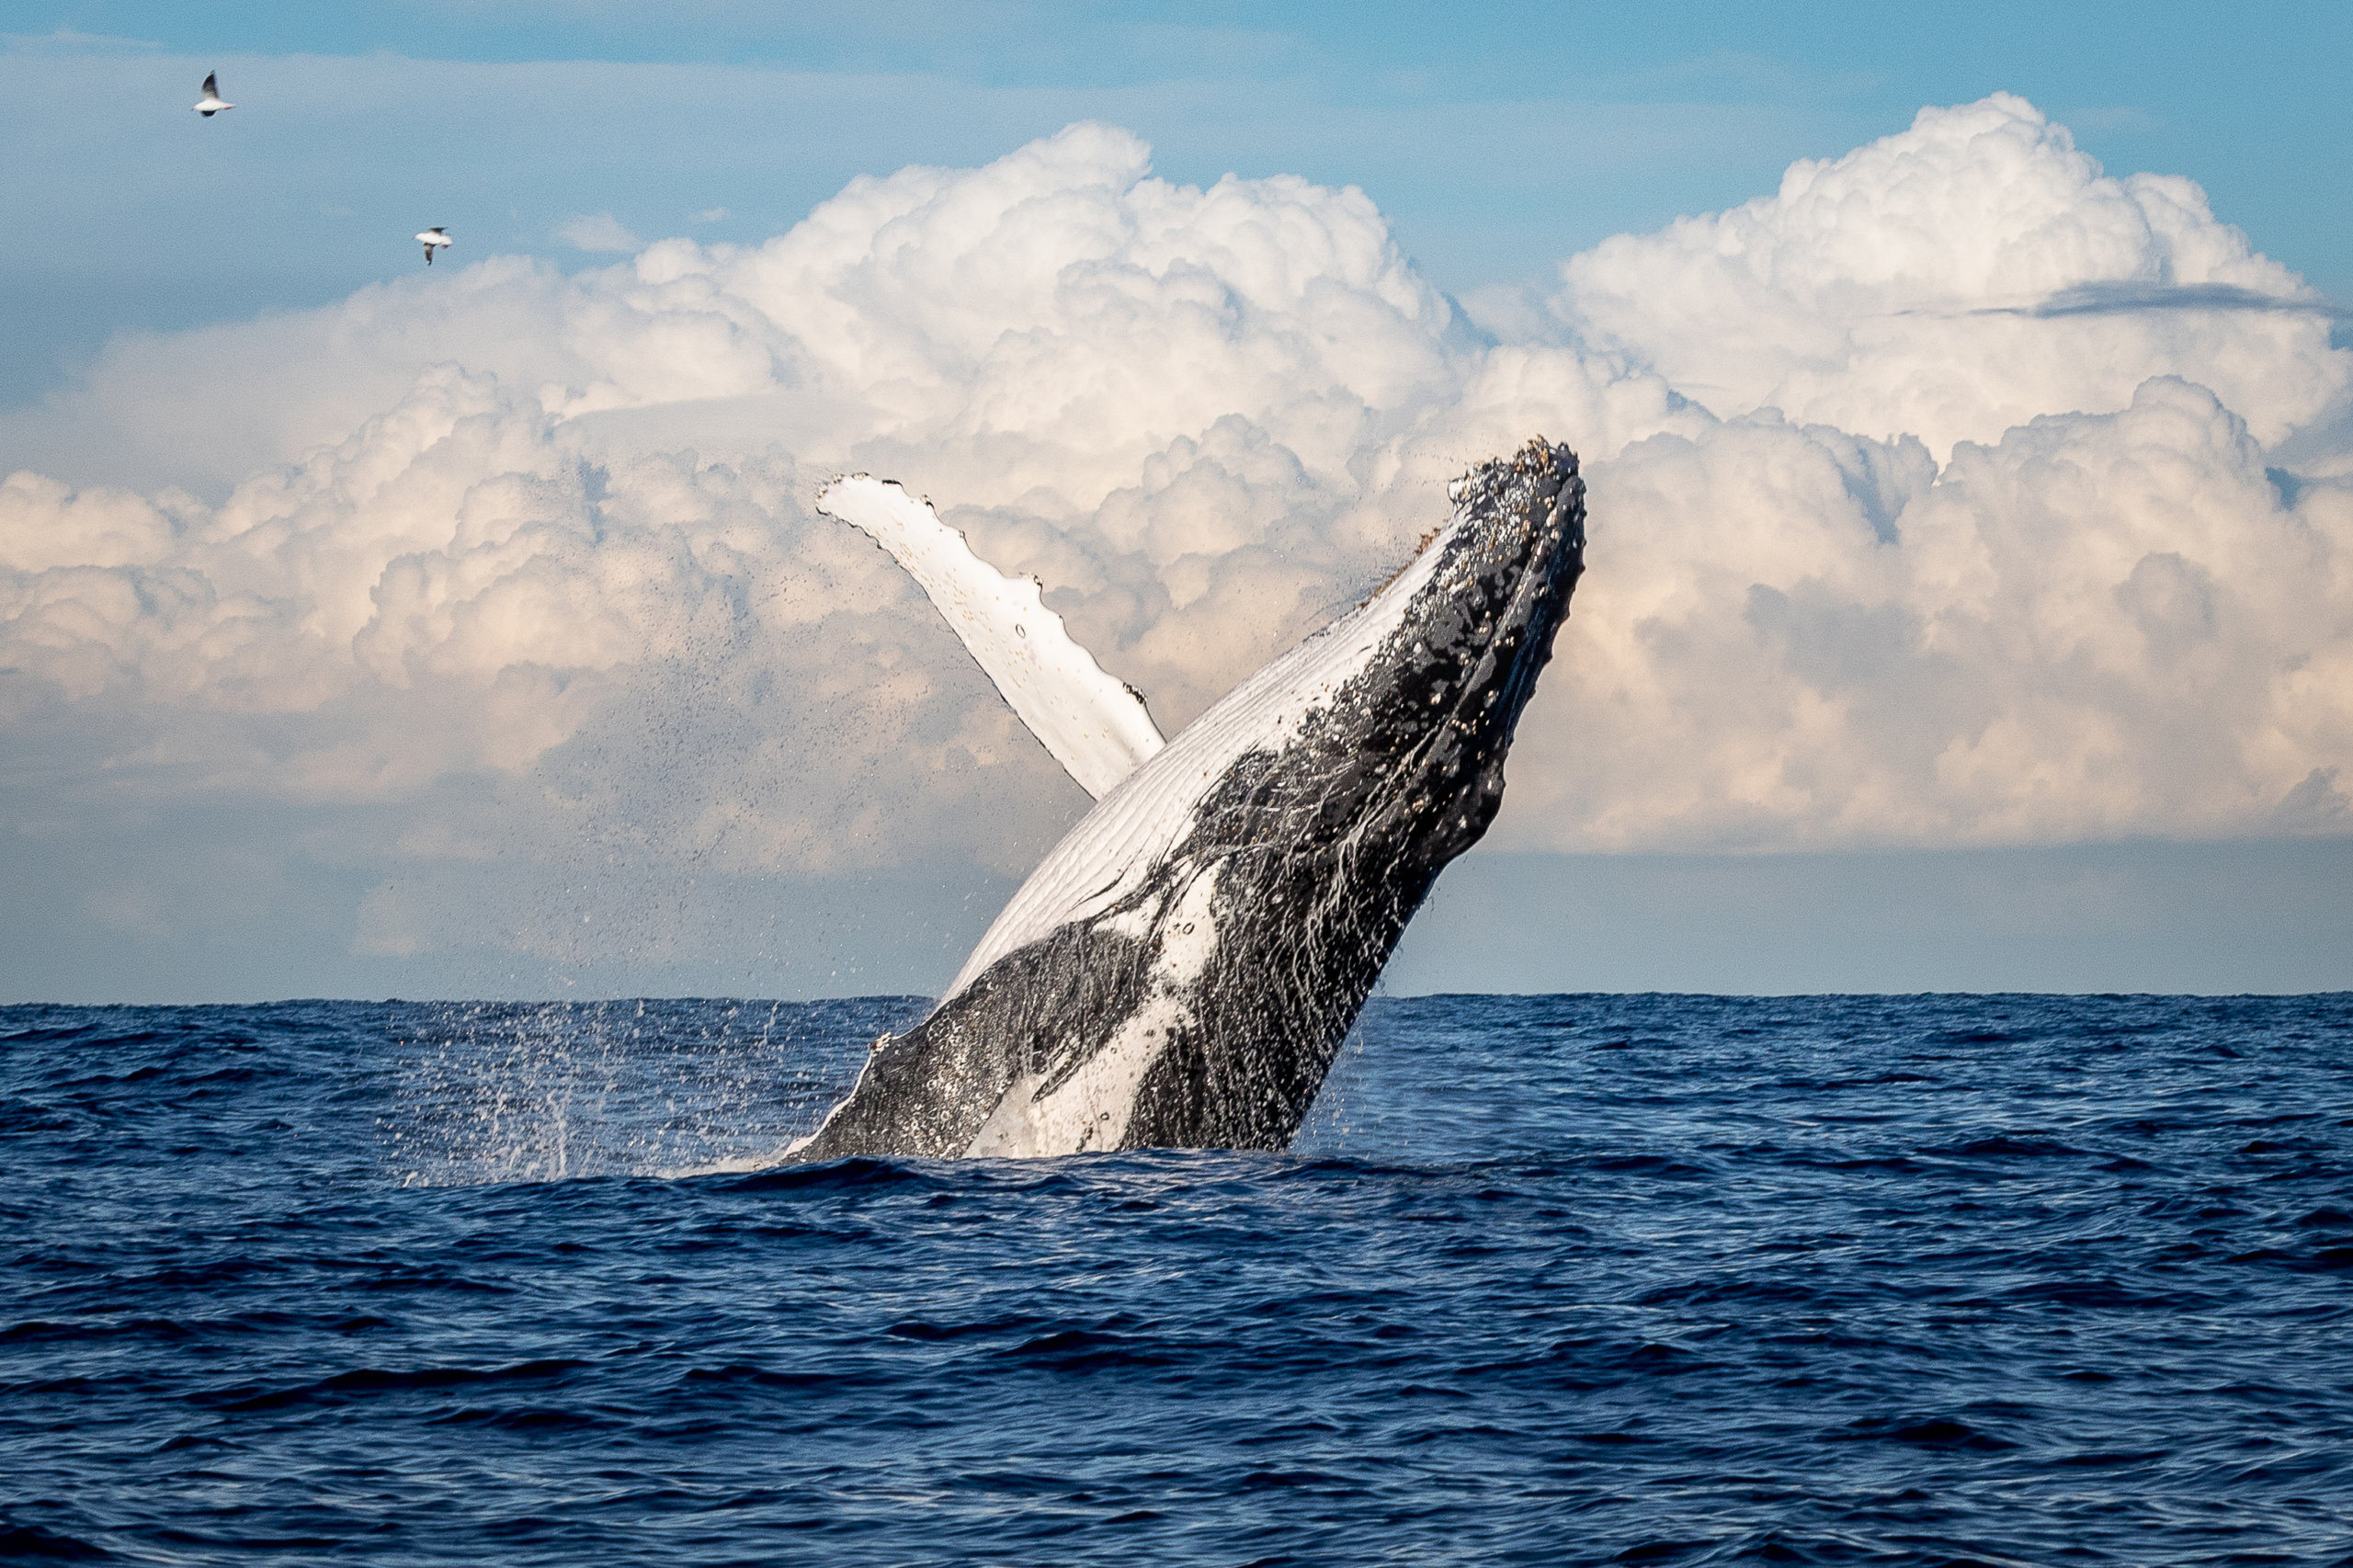 East End Summer Adventures - whale watching off Montauk! Humpback whale breaching